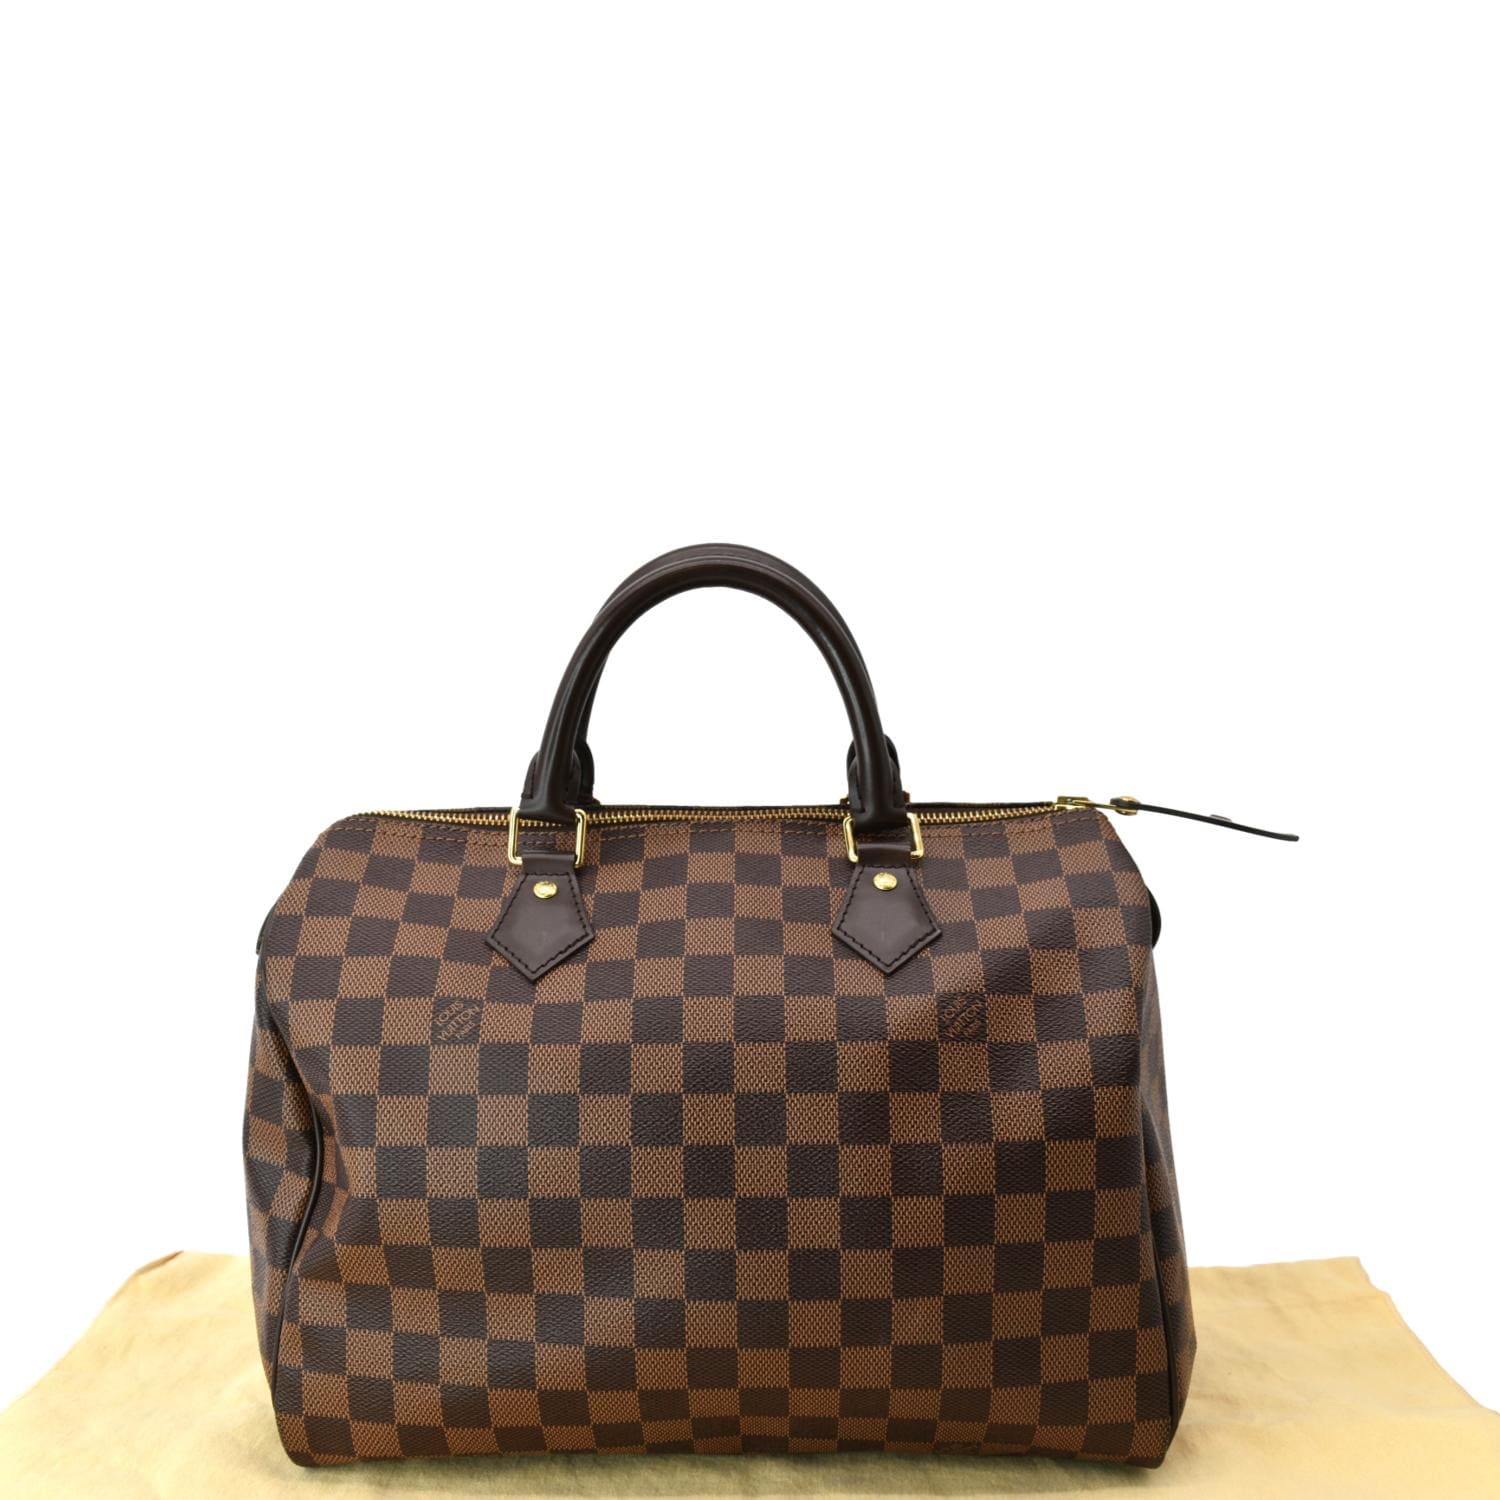 Louis Vuitton 2014 Pre-Owned Speedy 25 Tote Bag - Brown for Women